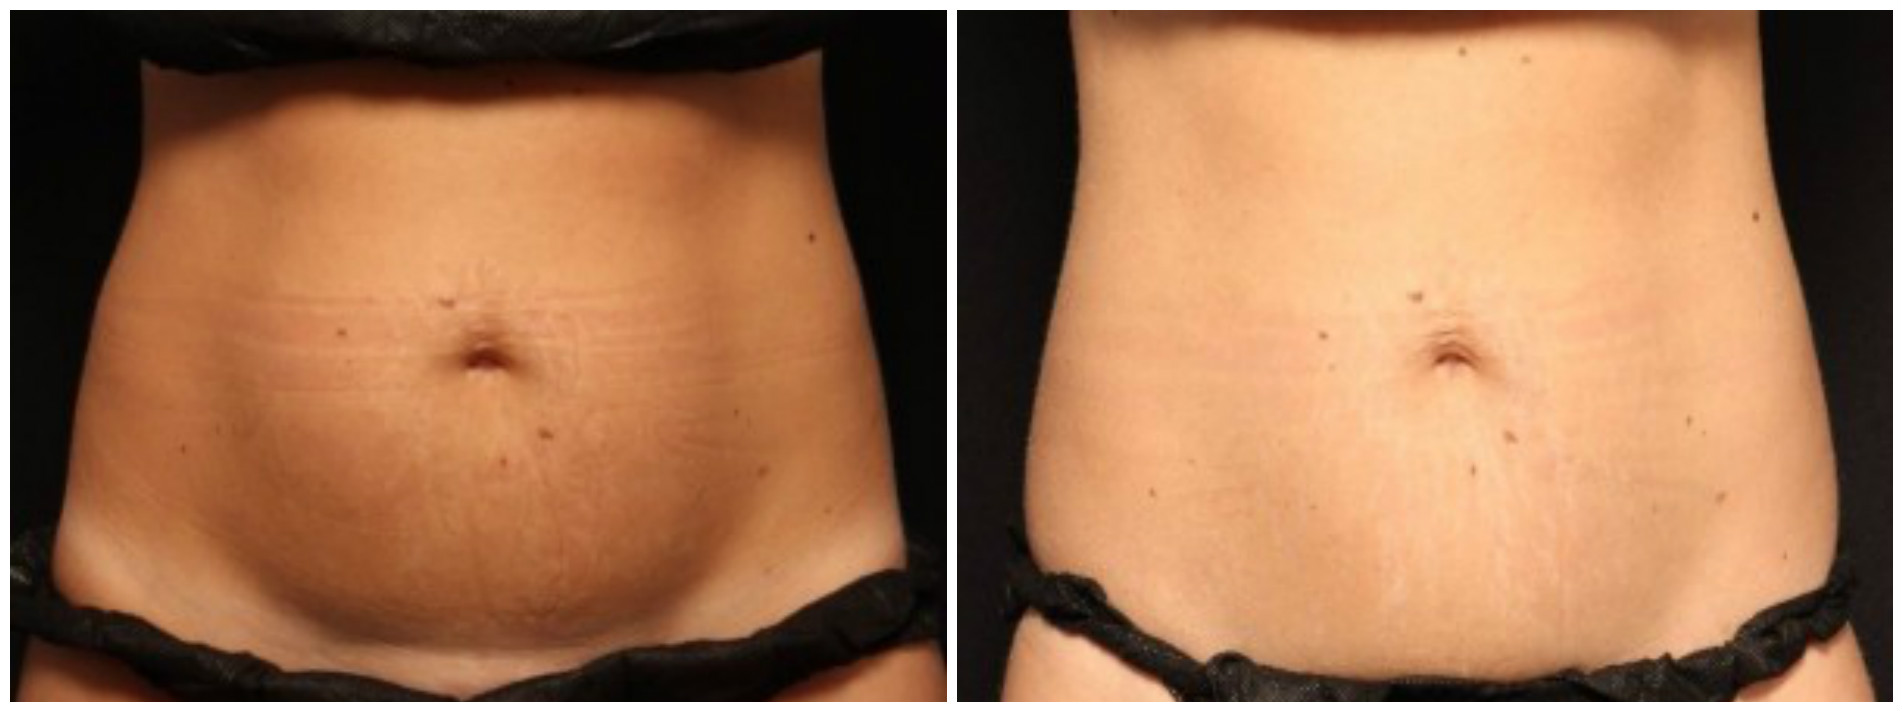 https://www.zwivel.com/newsroom/wp-content/uploads/2016/06/coolsculpting, before and after - front